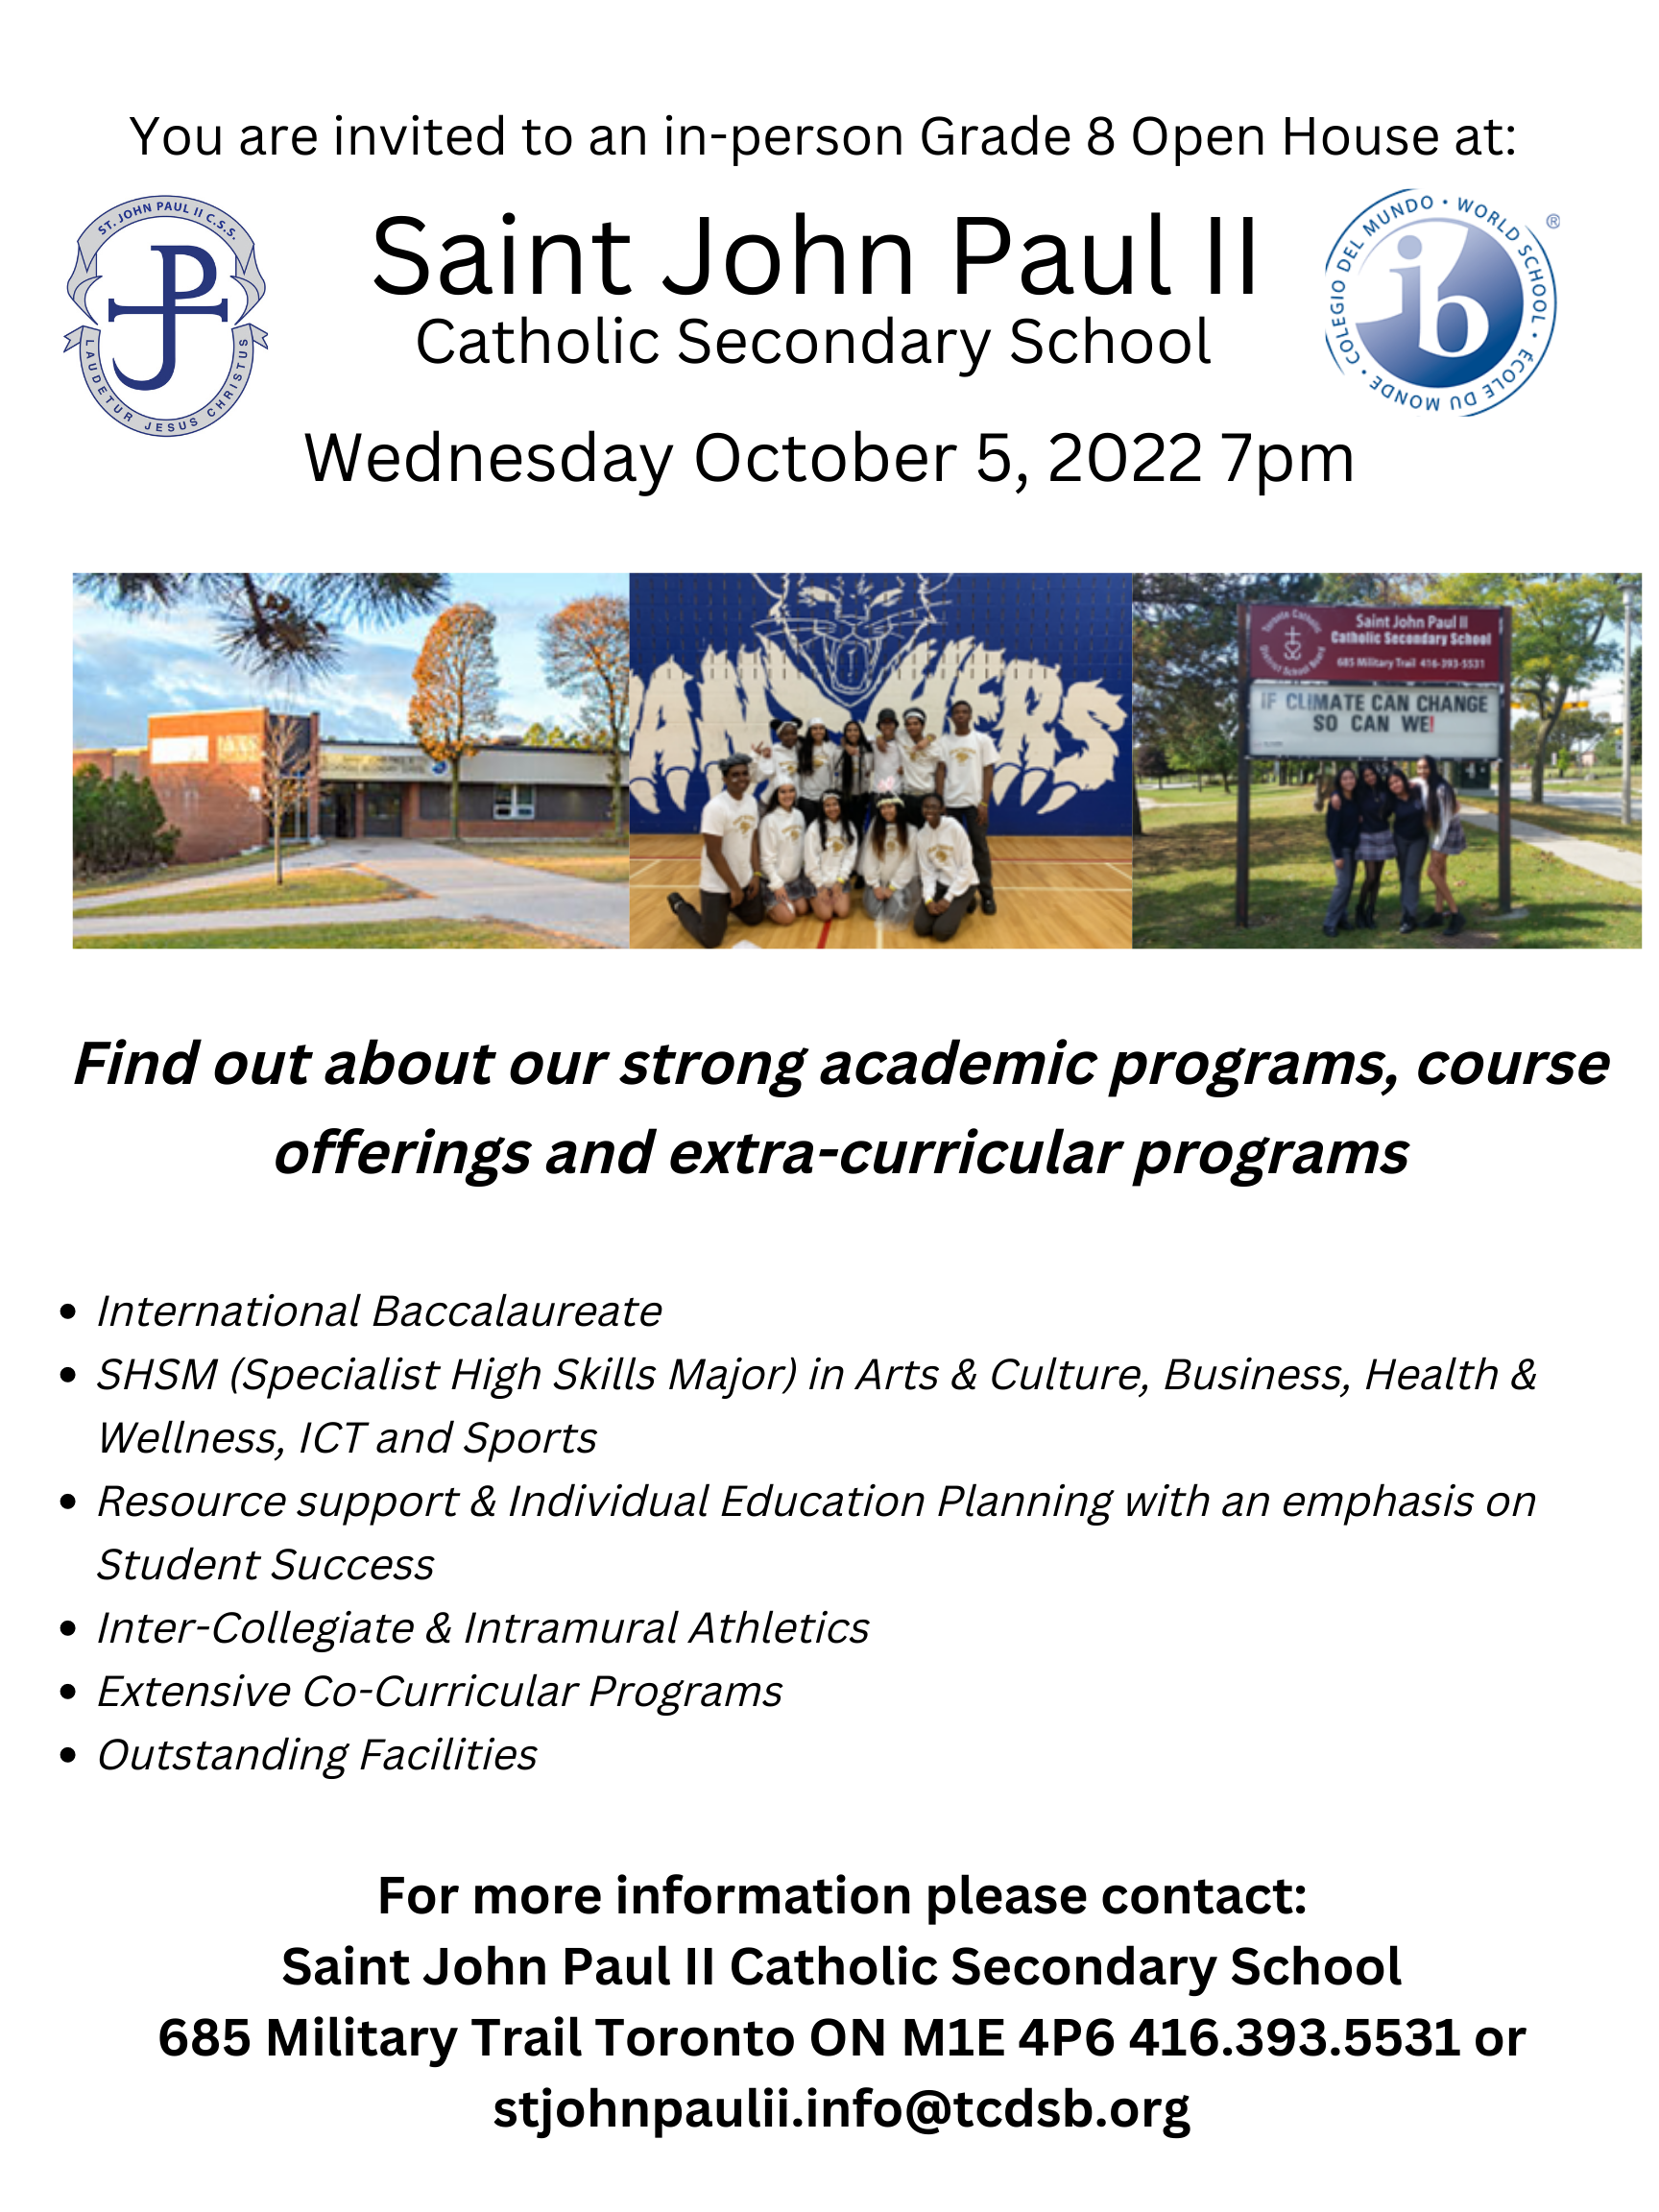 SJPII Open House flyer - You are invited to an in-person Grade 8 Open House at St. John Paul II Catholic Secondary School on Wednesday October 5, 2022 at 7pm. Find out about our strong academic programs, course offerings and extra-curricular programs. The programs are listed in bullet points: International Baccalaureate, SHSM (Specialist High Skills Major) in Arts & Culture, Business, Health & Wellness, ICT and Sports, Resources support & Individual Education Planning with an emphasis on Student Success, Inter-collegiate & Intramural Athletics, Extensive Co-curricular programs, Outstanding Facilities. For more information please contact Saint John Paul II Catholic Secondary School - 685 Military Trail, Toronto, ON, M1E 4P6 - phone 416 393 5531 - email stjohnpaulii.info@tcdsb.org